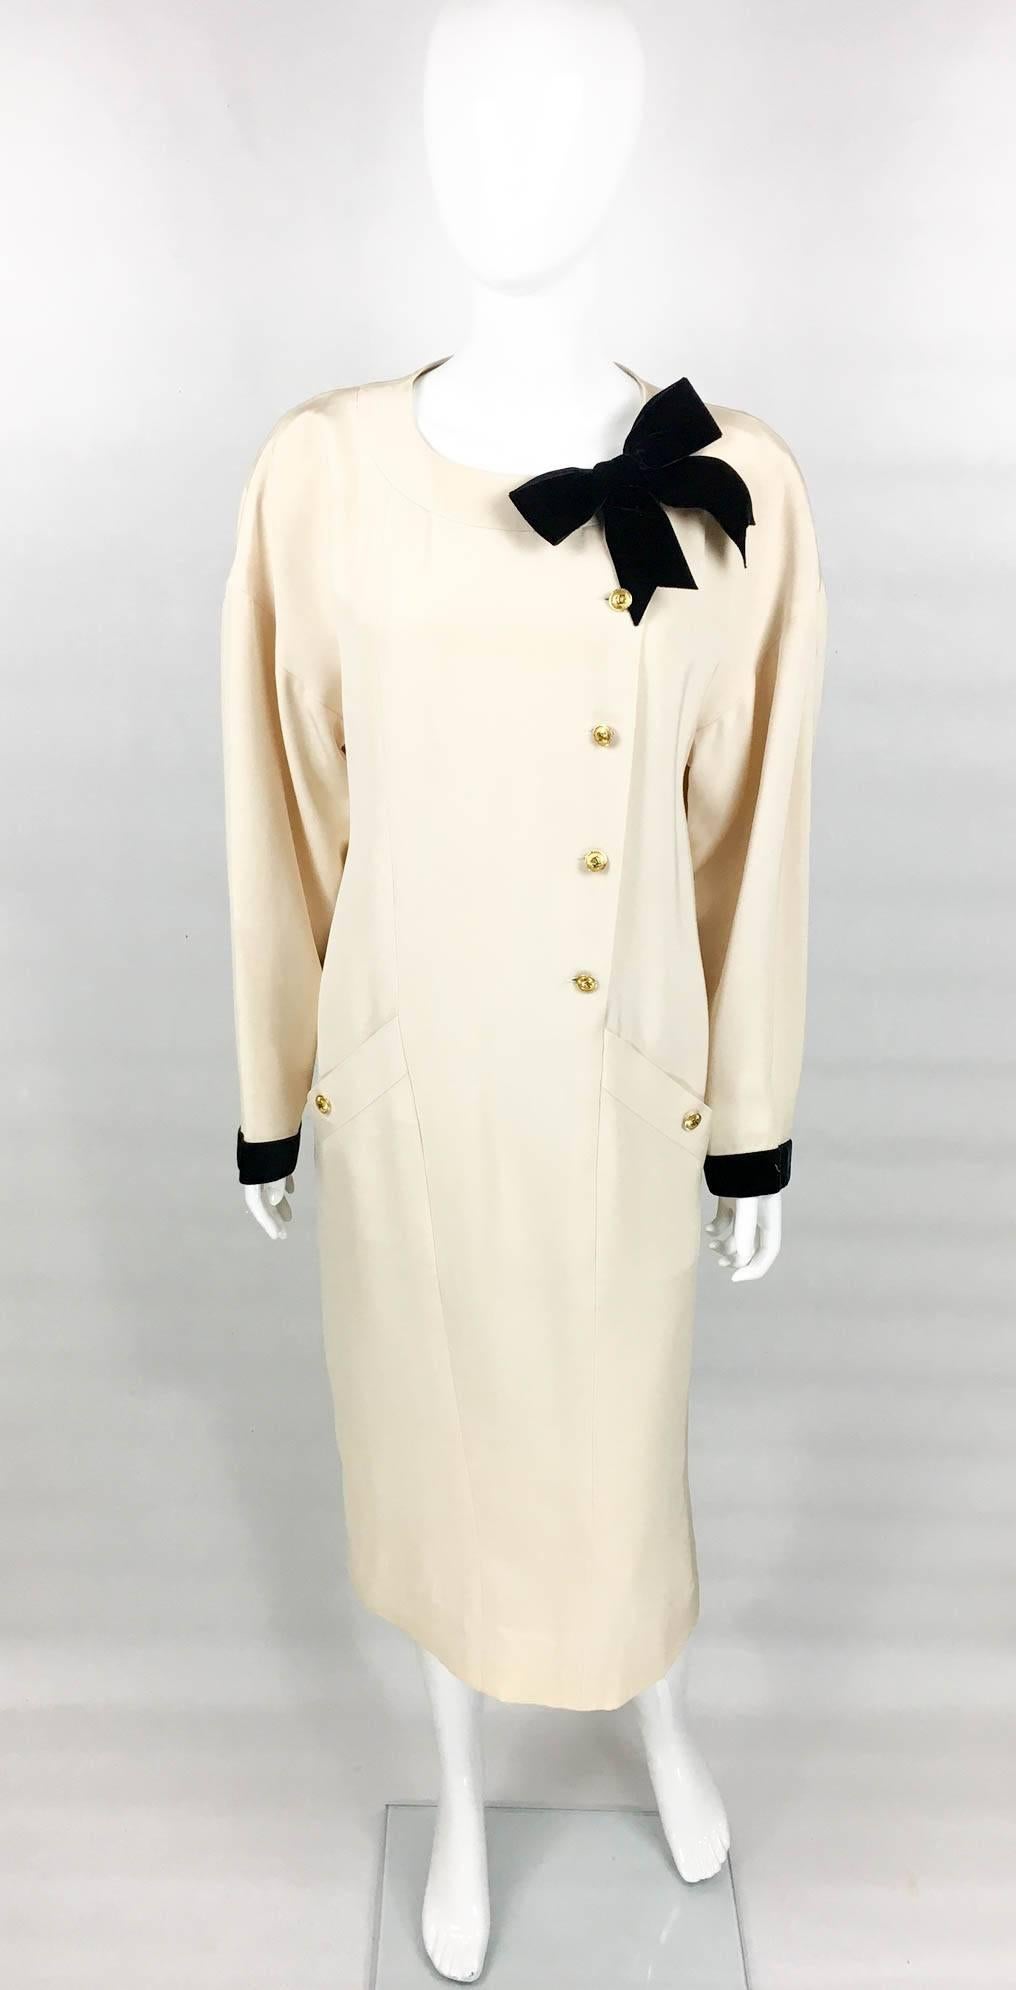 Chanel Champagne Silk Dress With Black Velvet Cuffs and Bow - 1980s In Excellent Condition For Sale In London, Chelsea